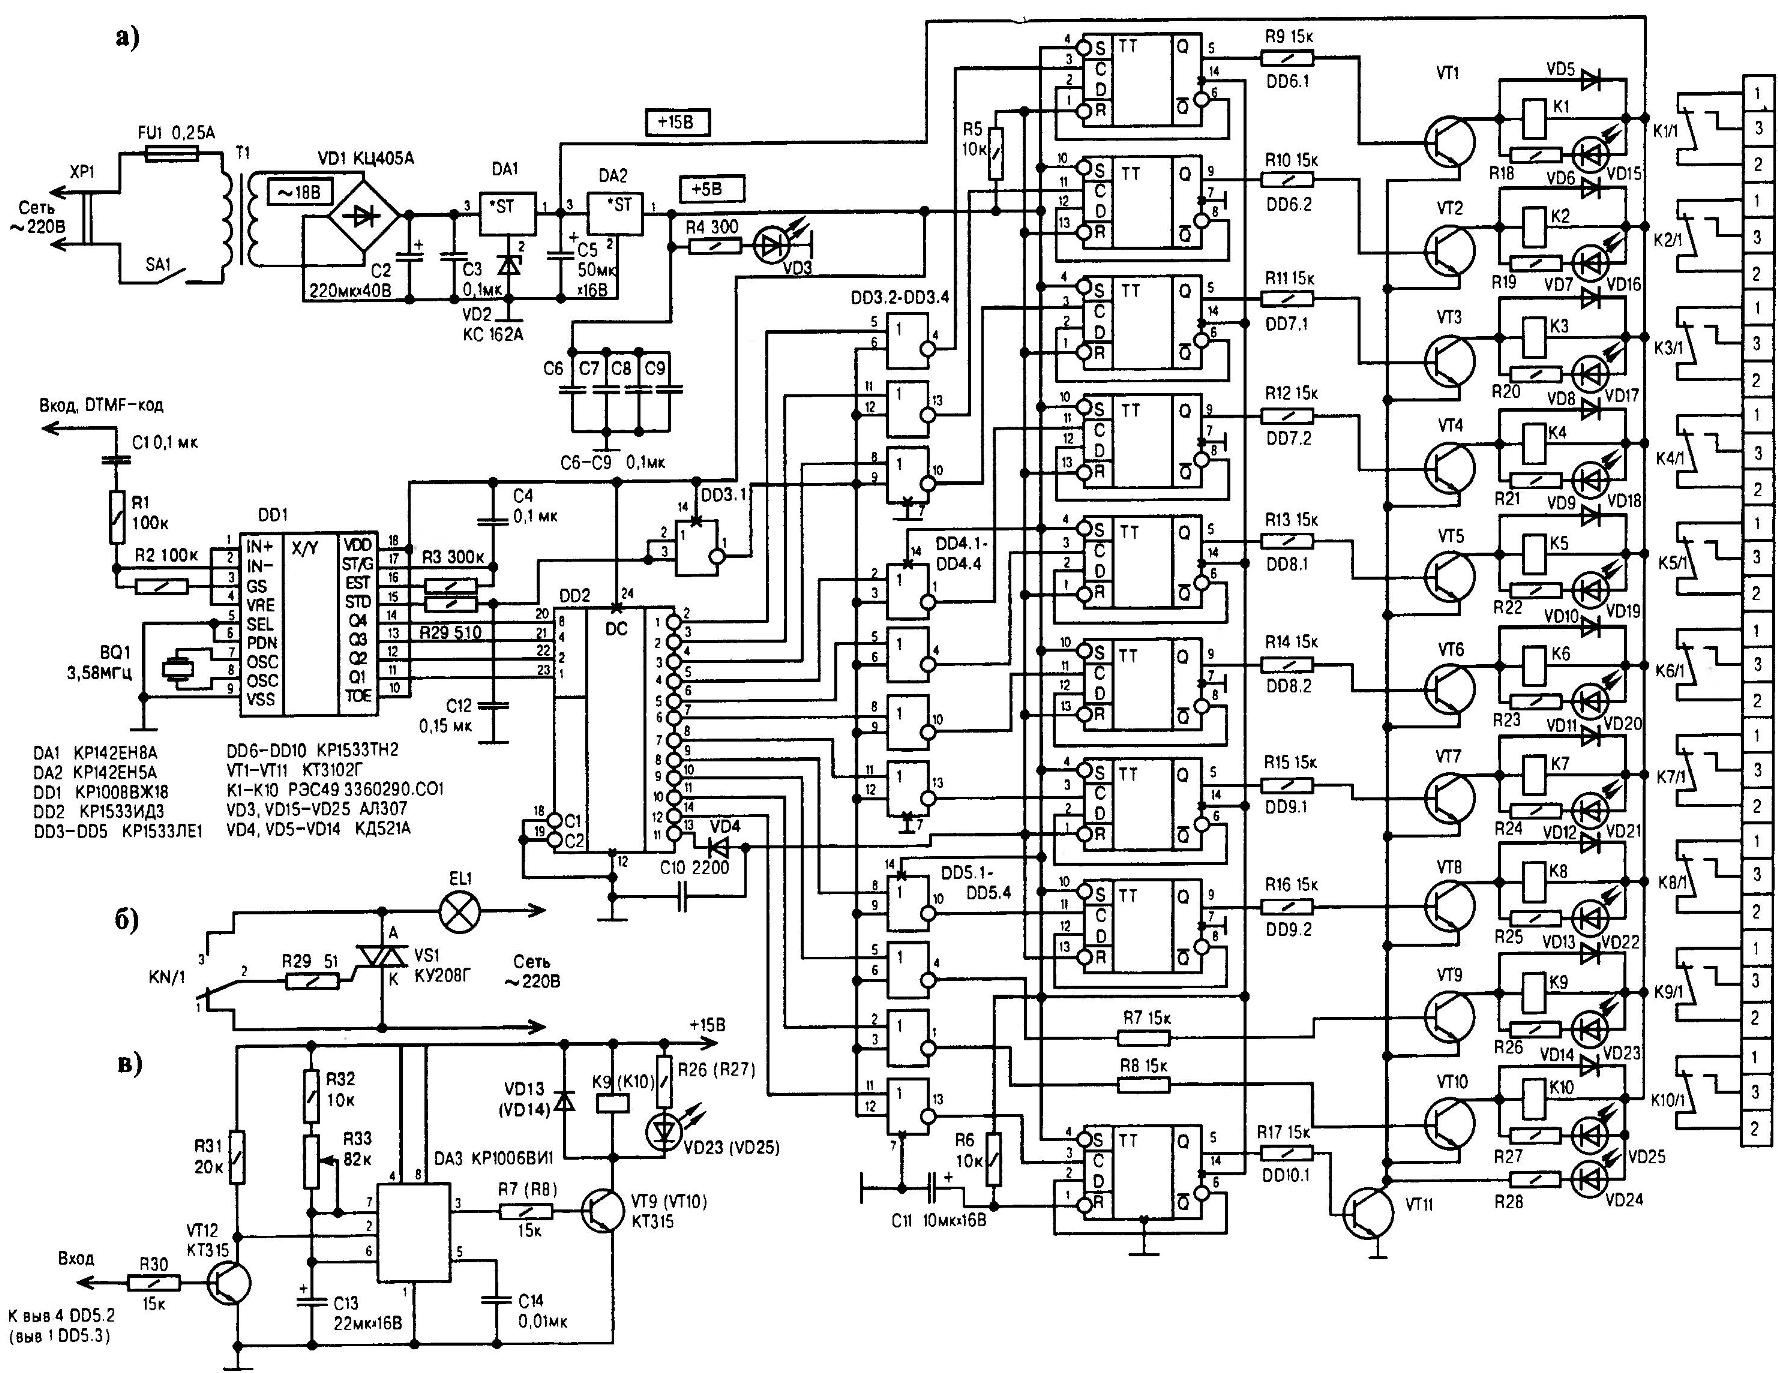 Circuit diagram of remote control system (a) on the basis of 